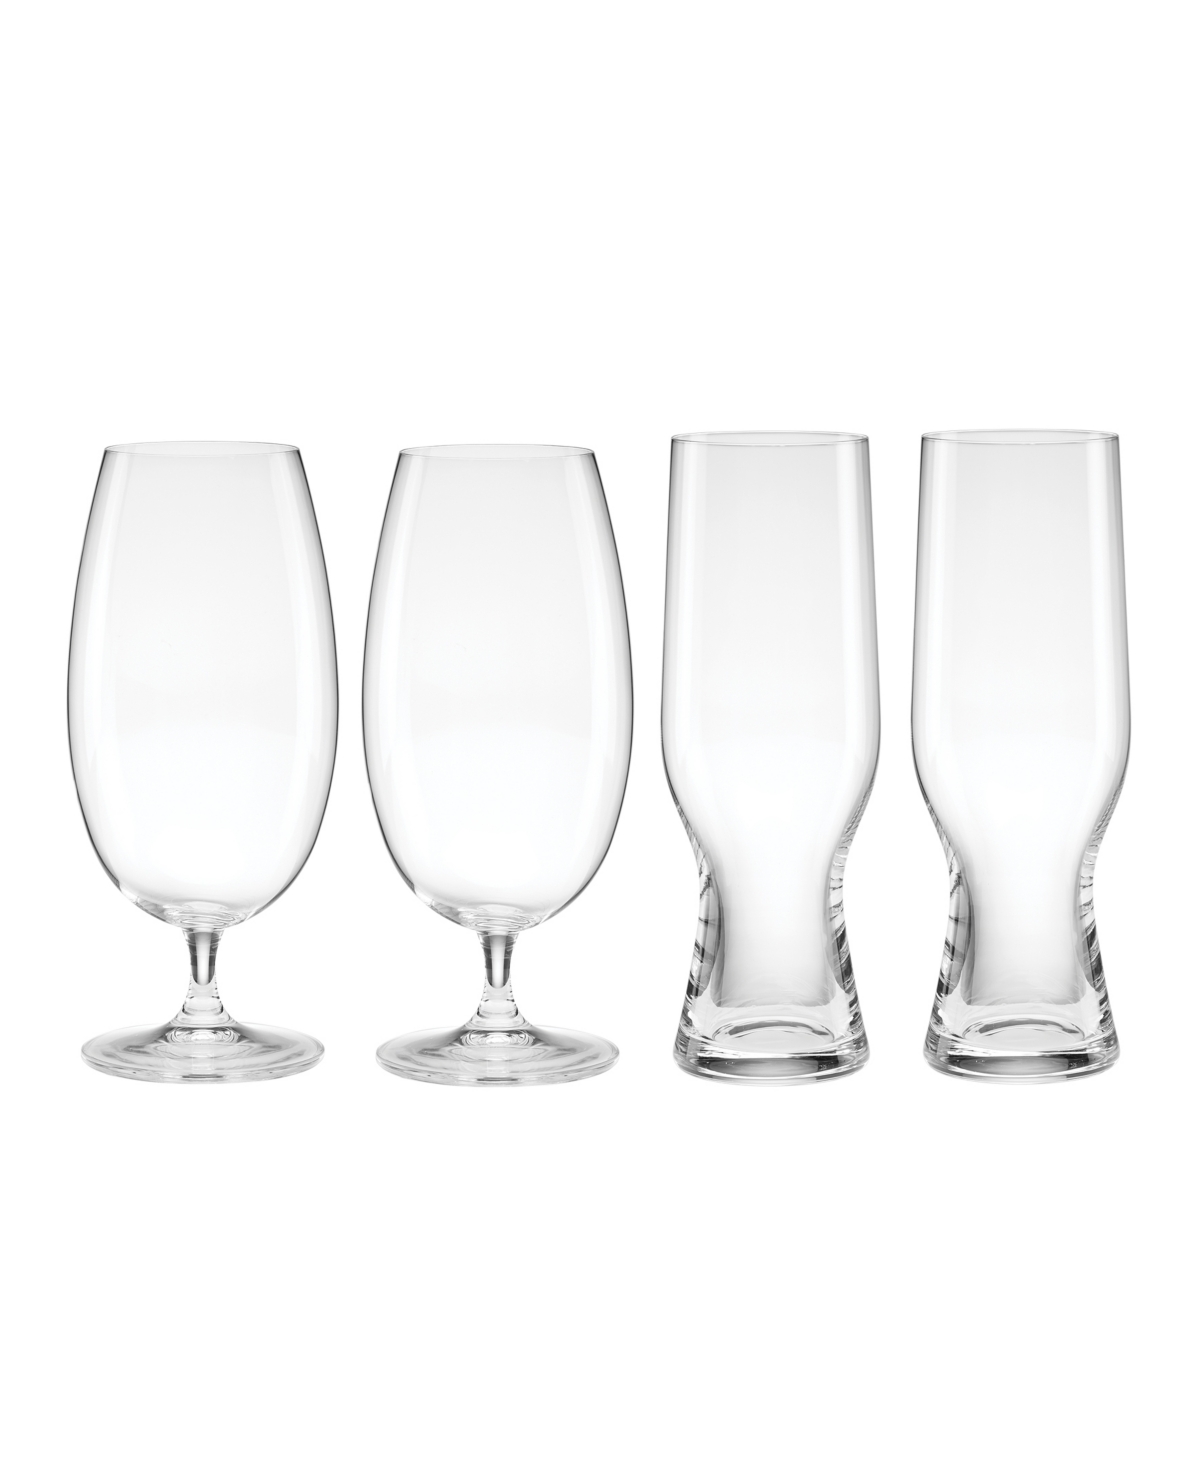 Lenox Tuscany Classics Assorted Beer Glass Set, 4 Piece In Clear